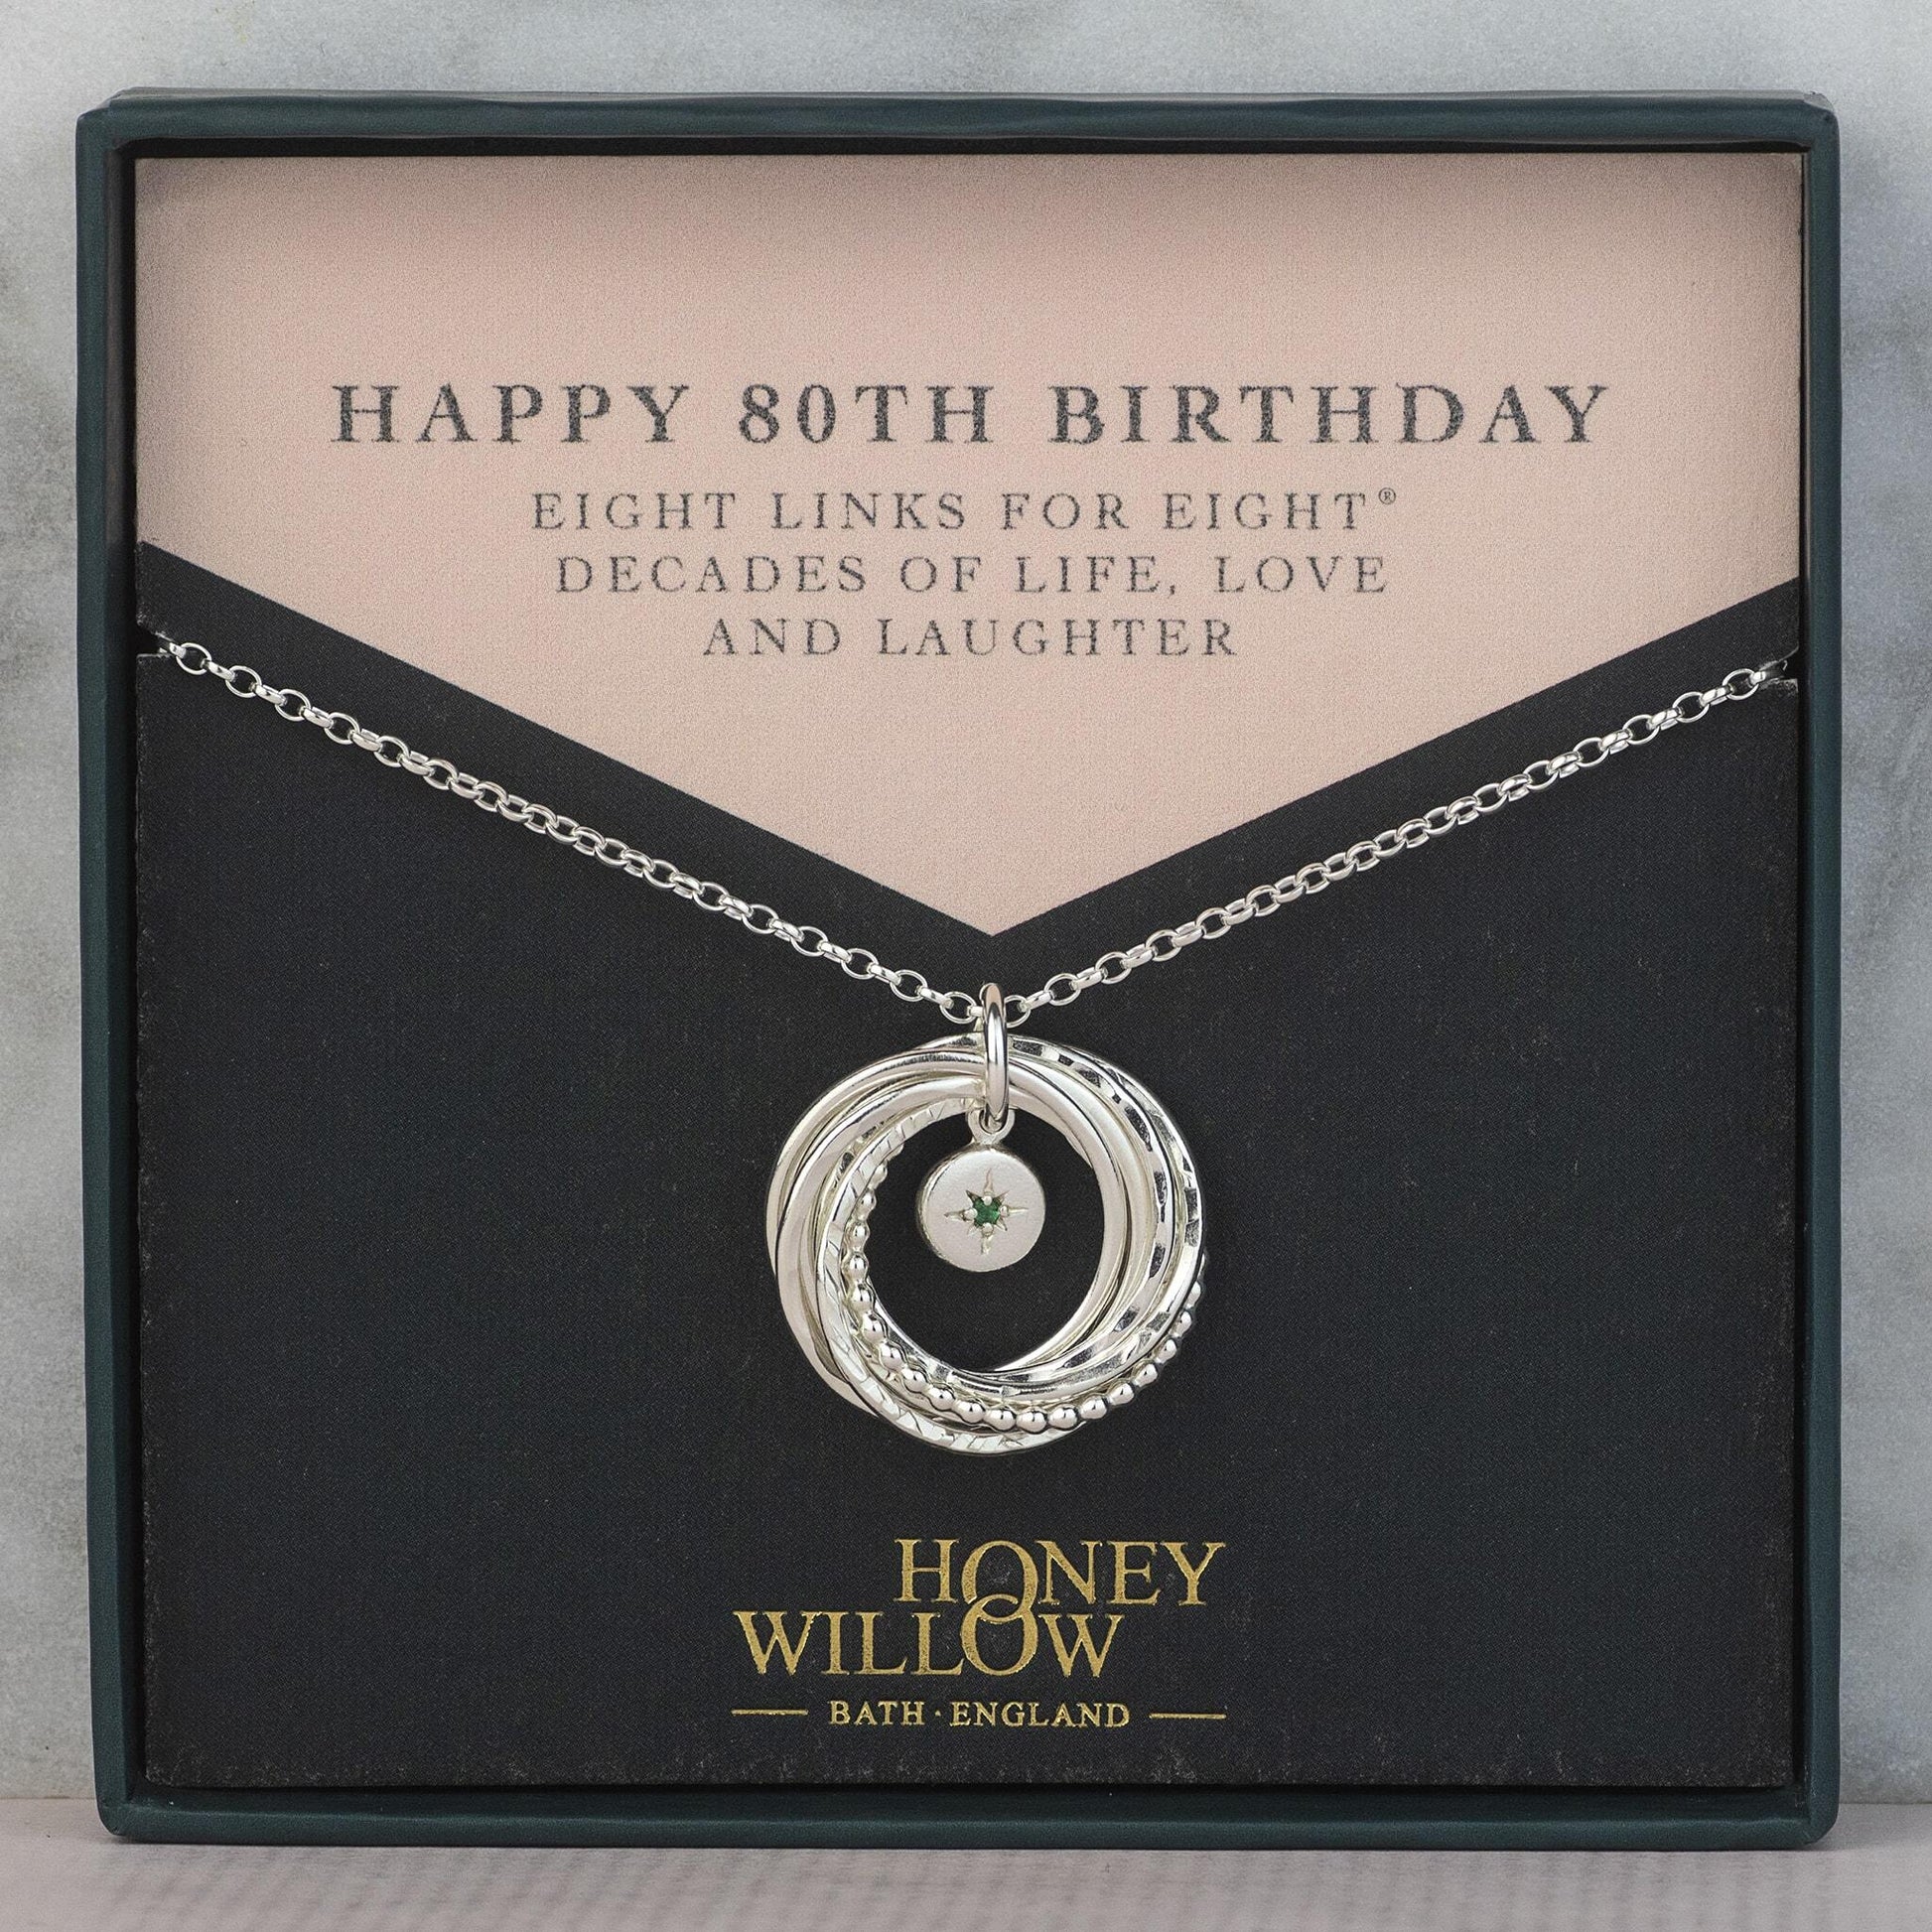 80th Birthday Birthstone Necklace - Silver - The Original 8 Links for 8® Decades Necklace